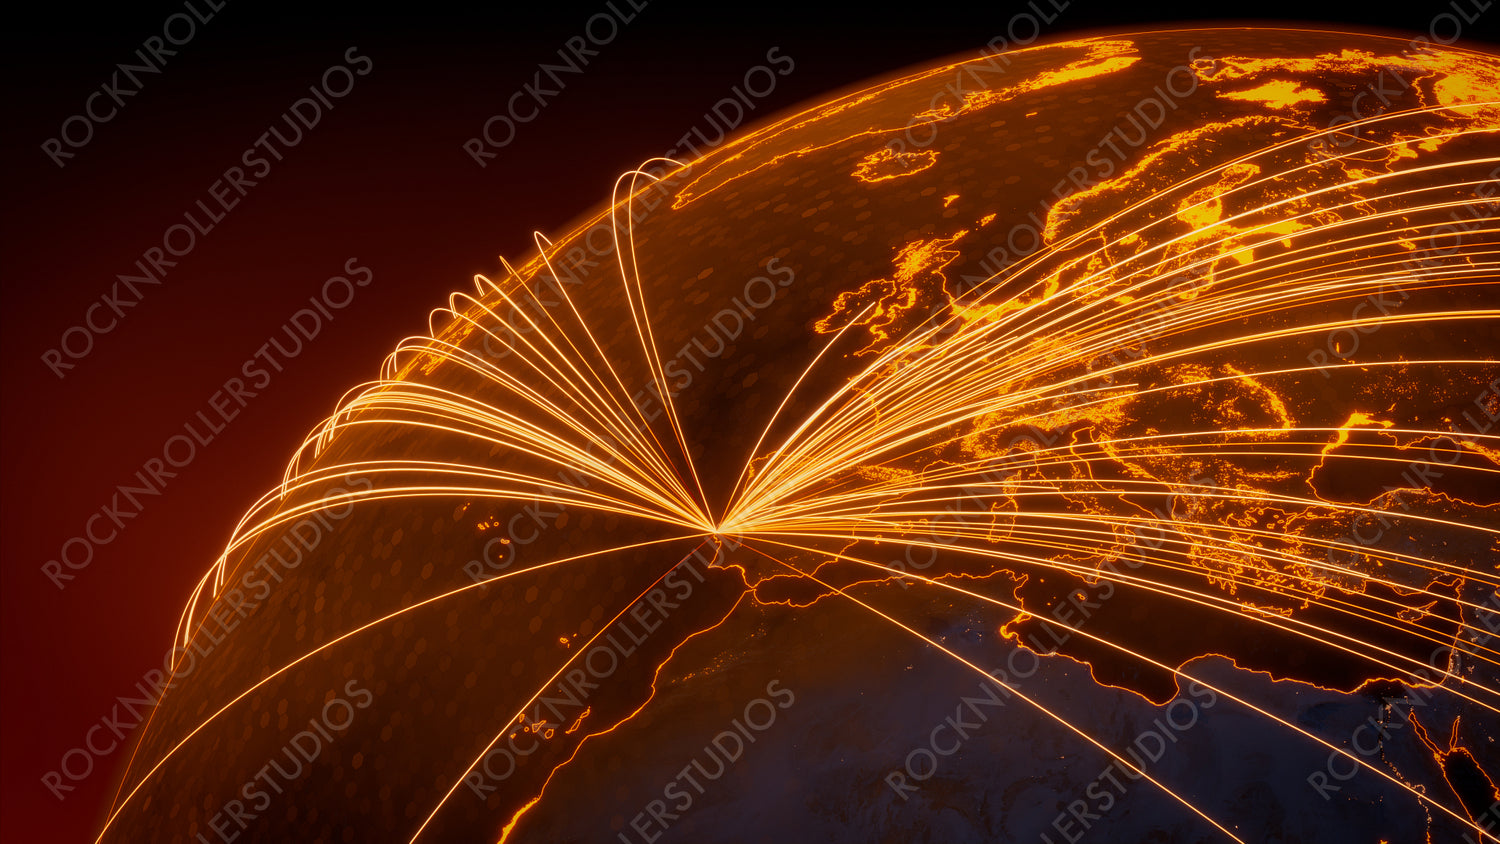 Futuristic Neon Map. Orange Lines connect Lisbon, Portugal with Cities across the World. International Travel or Networking Concept.